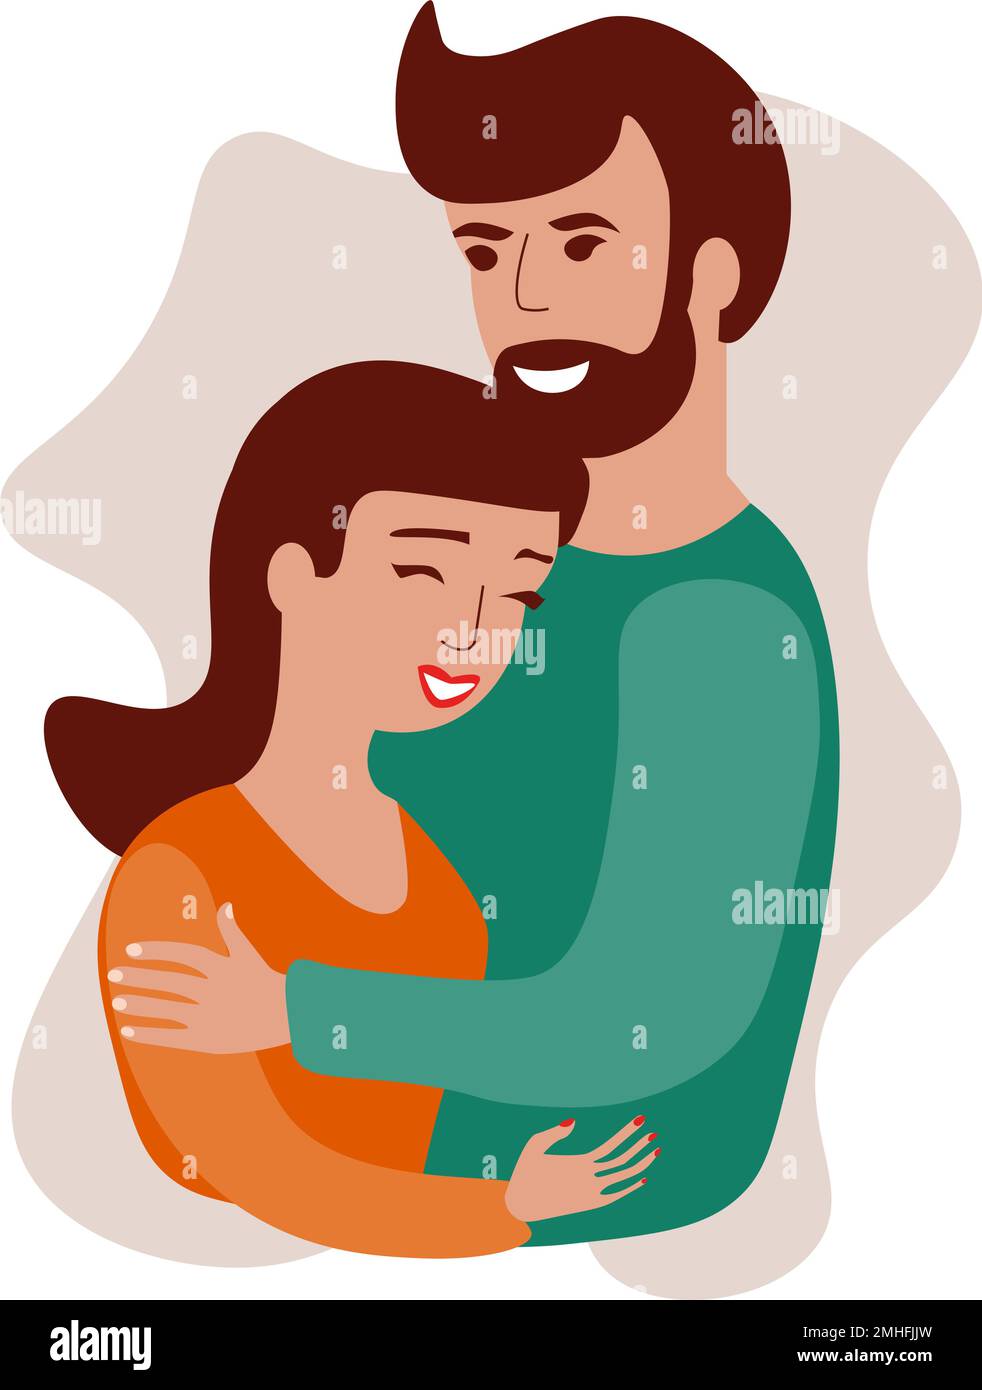 Valentines day greeting card with young couple on abstract shape background drawing in flat style Stock Vector